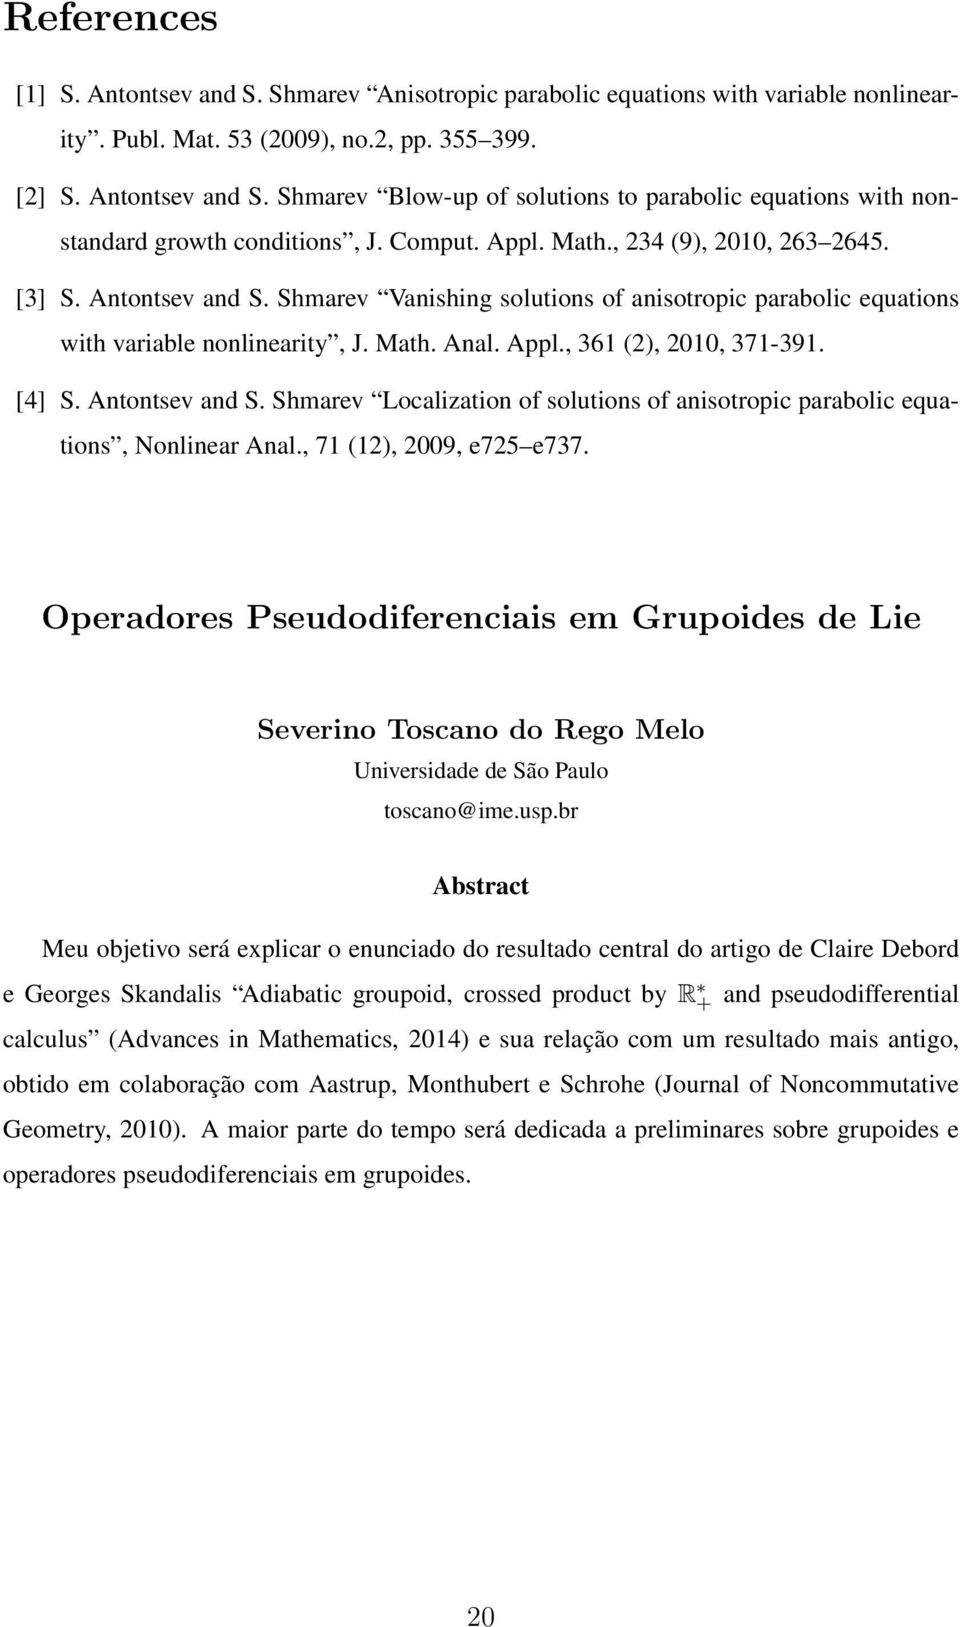 [4] S. Antontsev and S. Shmarev Localization of solutions of anisotropic parabolic equations, Nonlinear Anal., 71 (12), 2009, e725 e737.